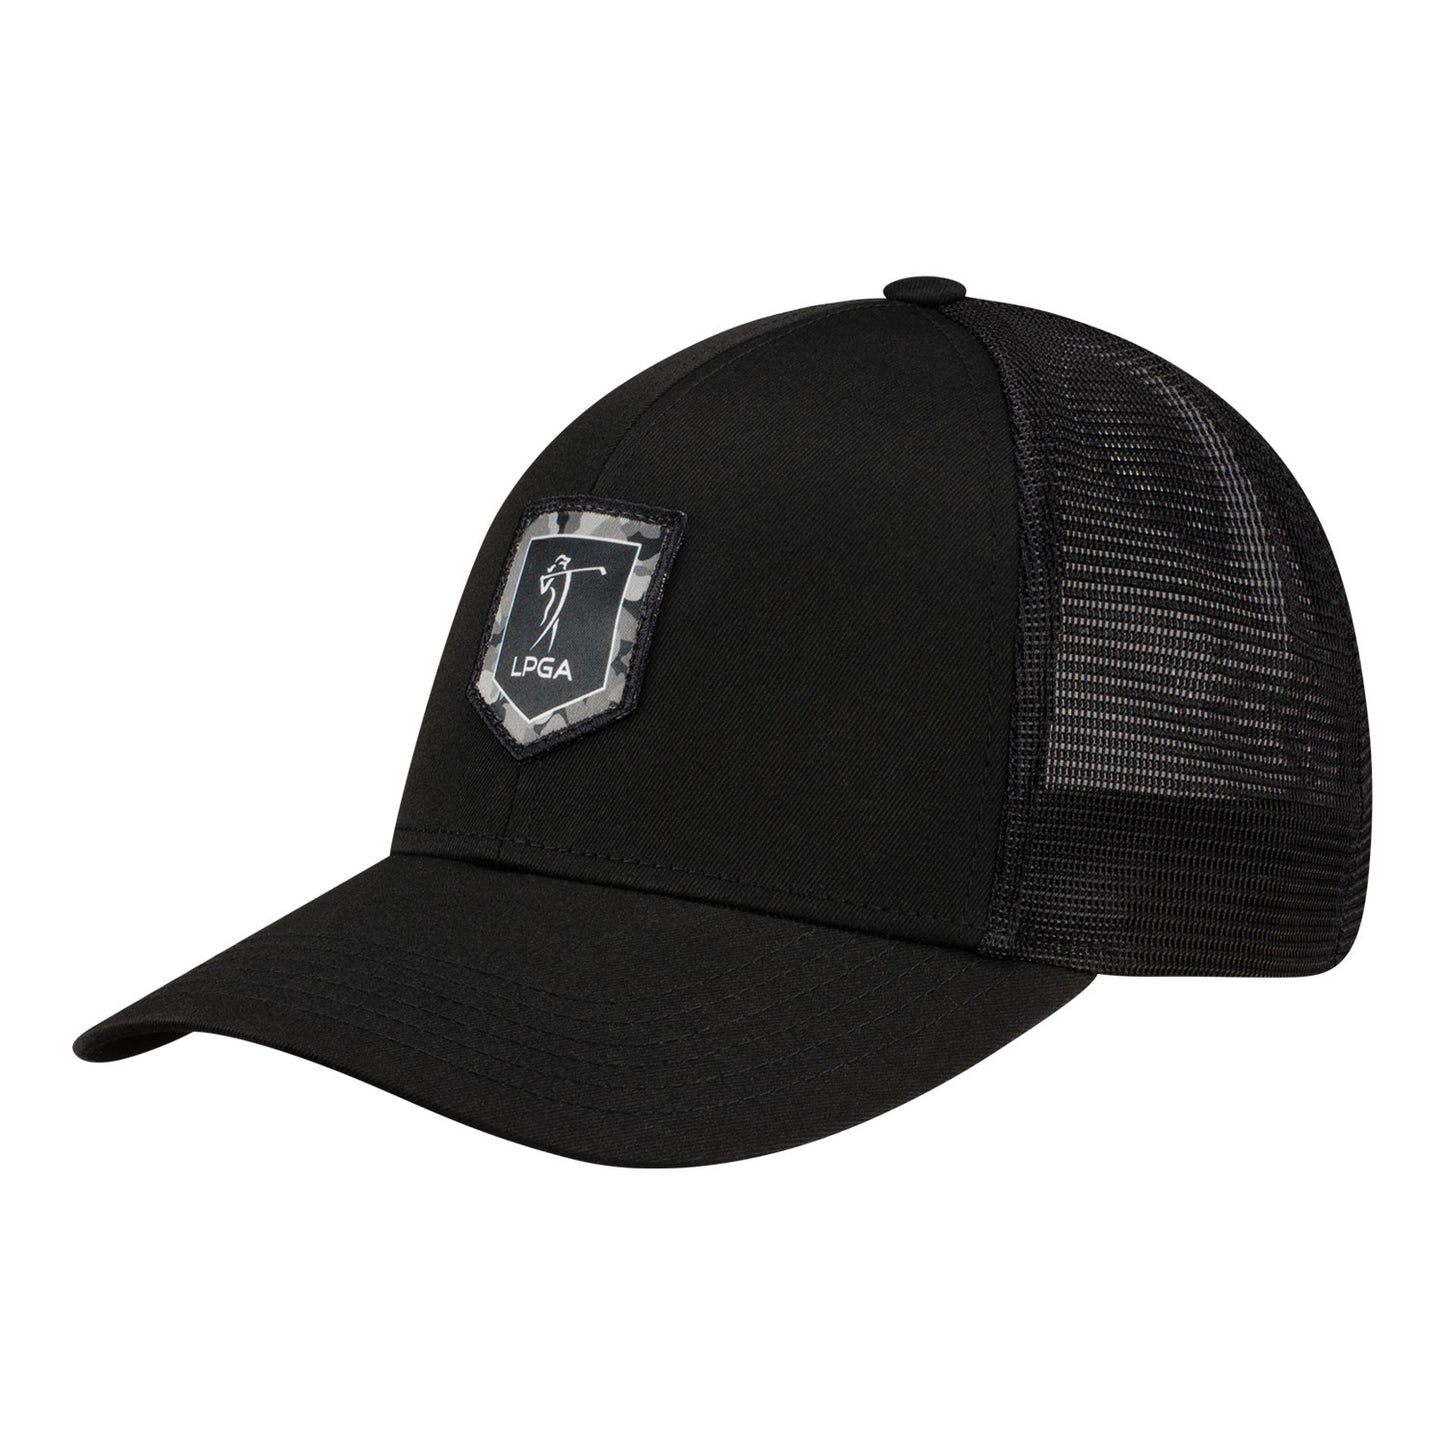 Imperial LPGA Men's Mesh Back Hat with Satin Edged Patch in Black - Angled Left Side View